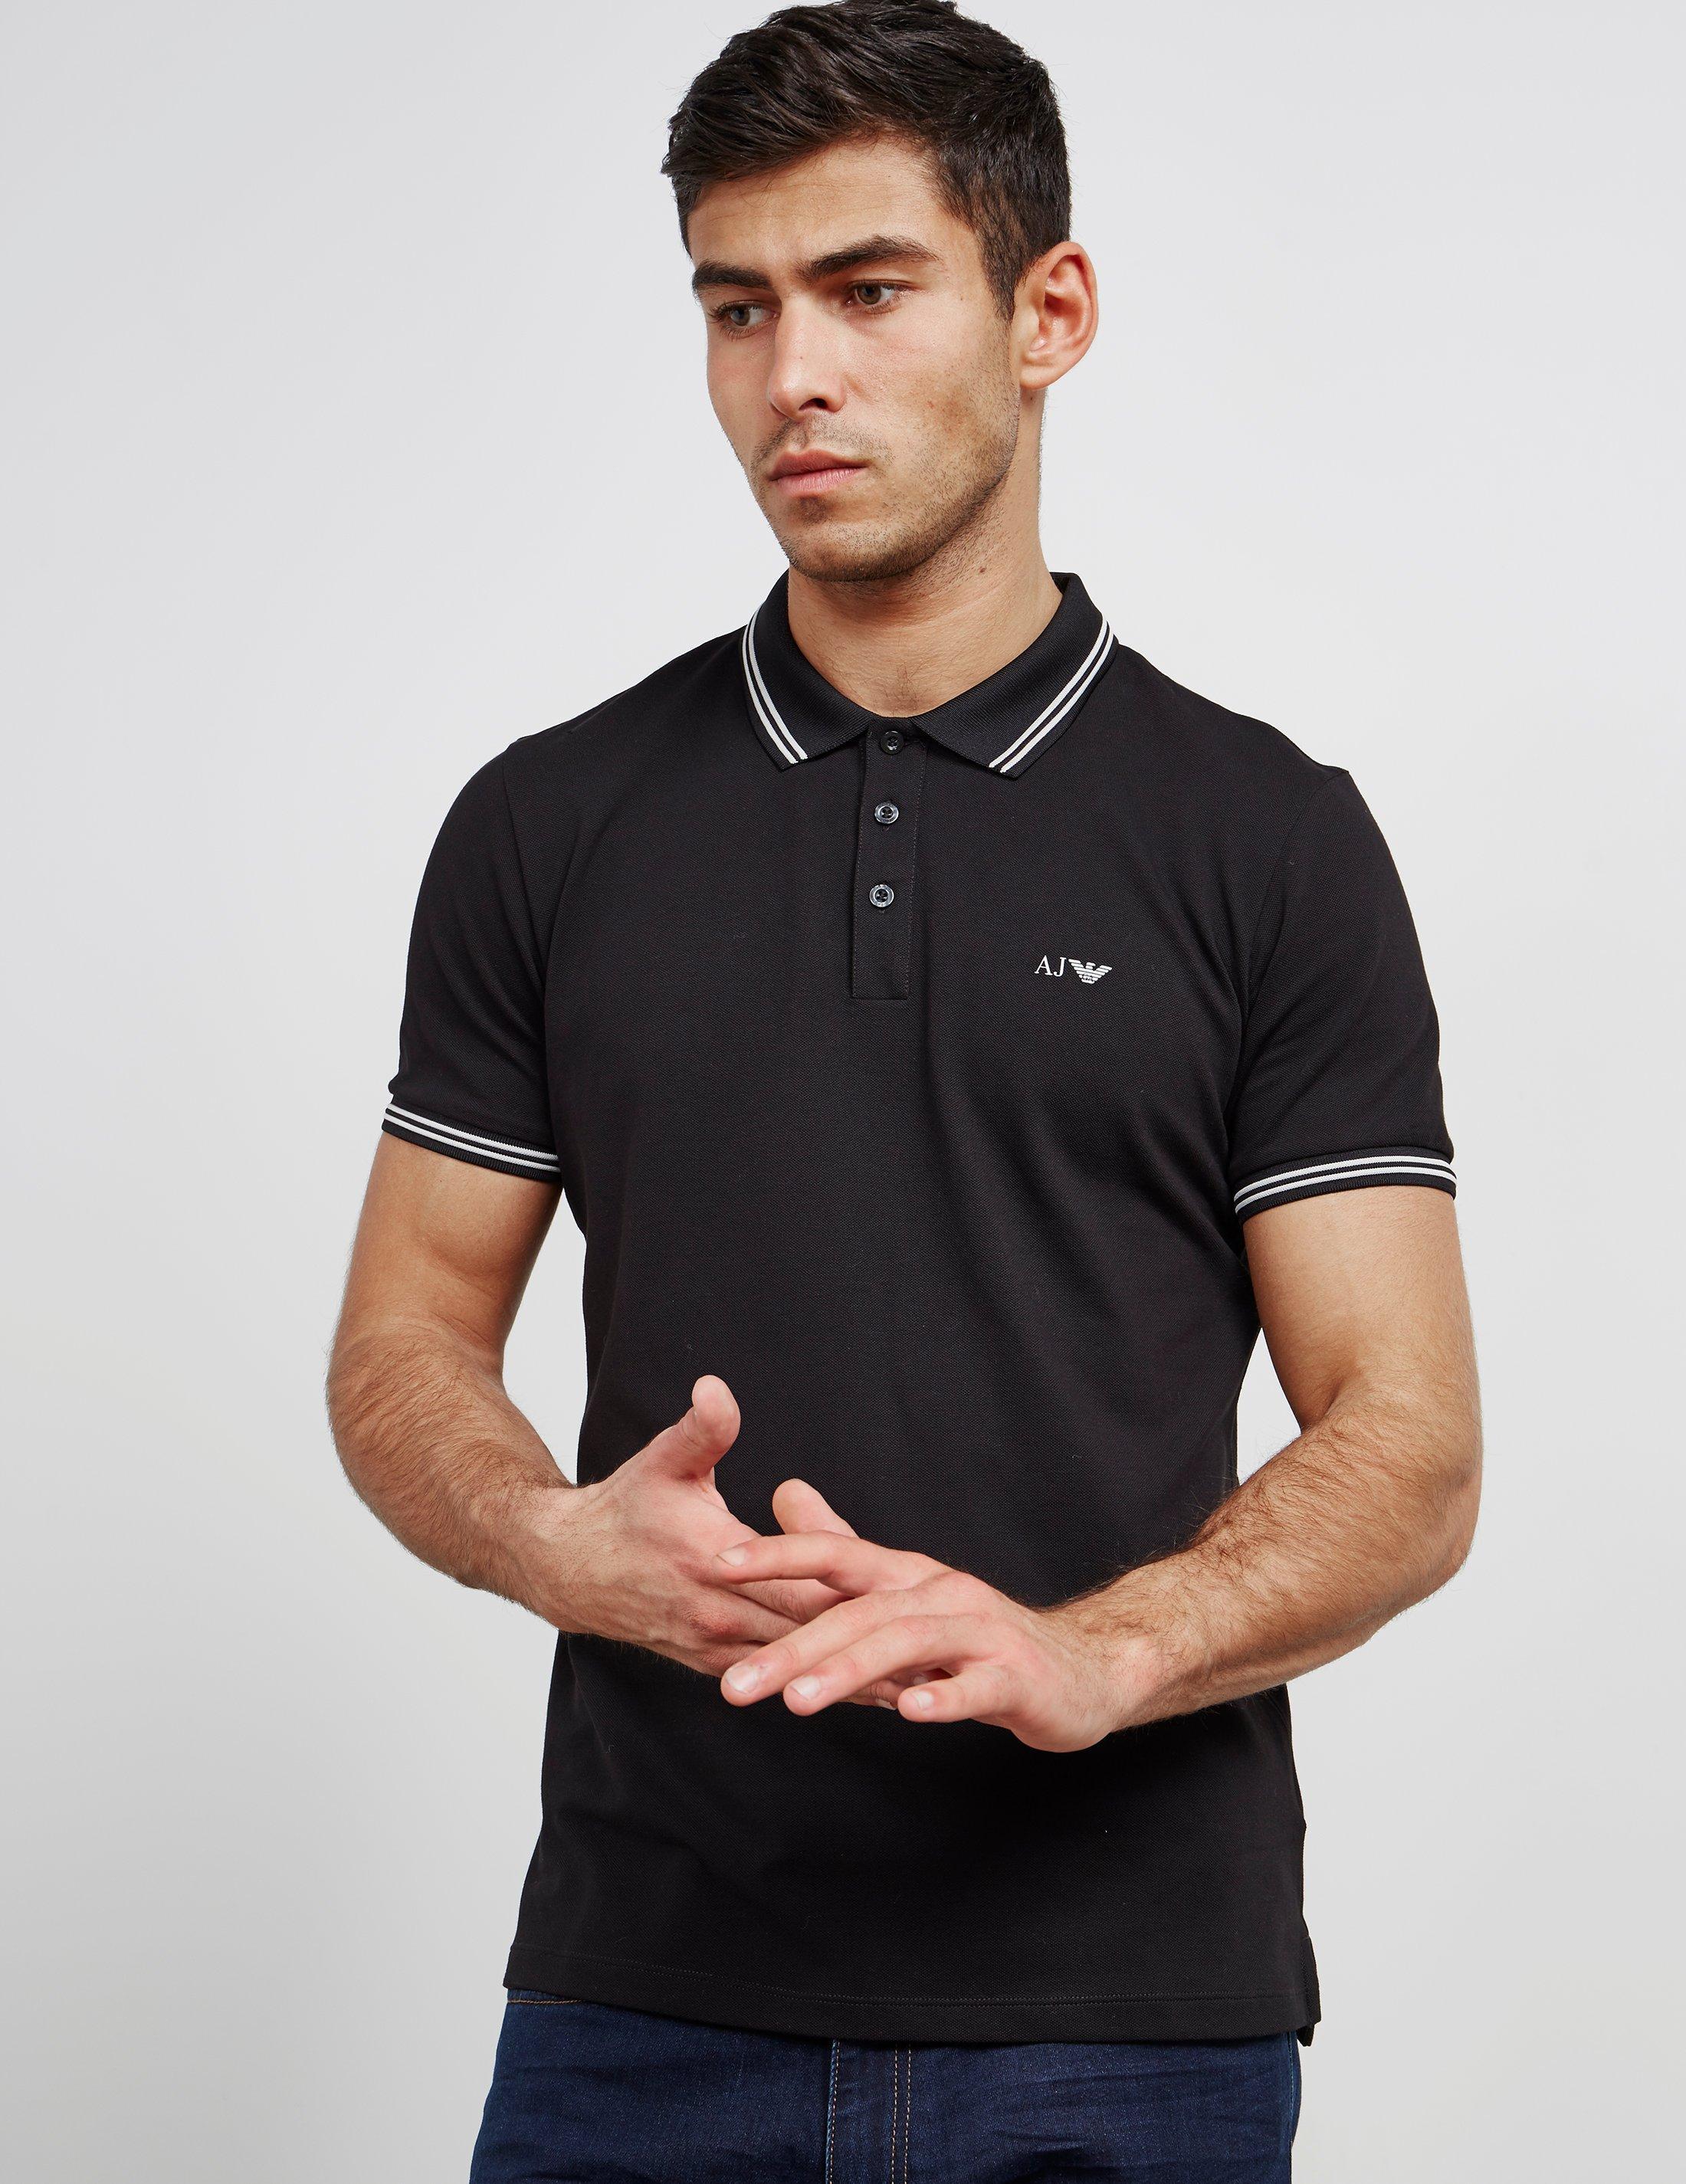 Armani Jeans Mens Twin Tipped Short Sleeve Polo Shirt Black for Men | Lyst